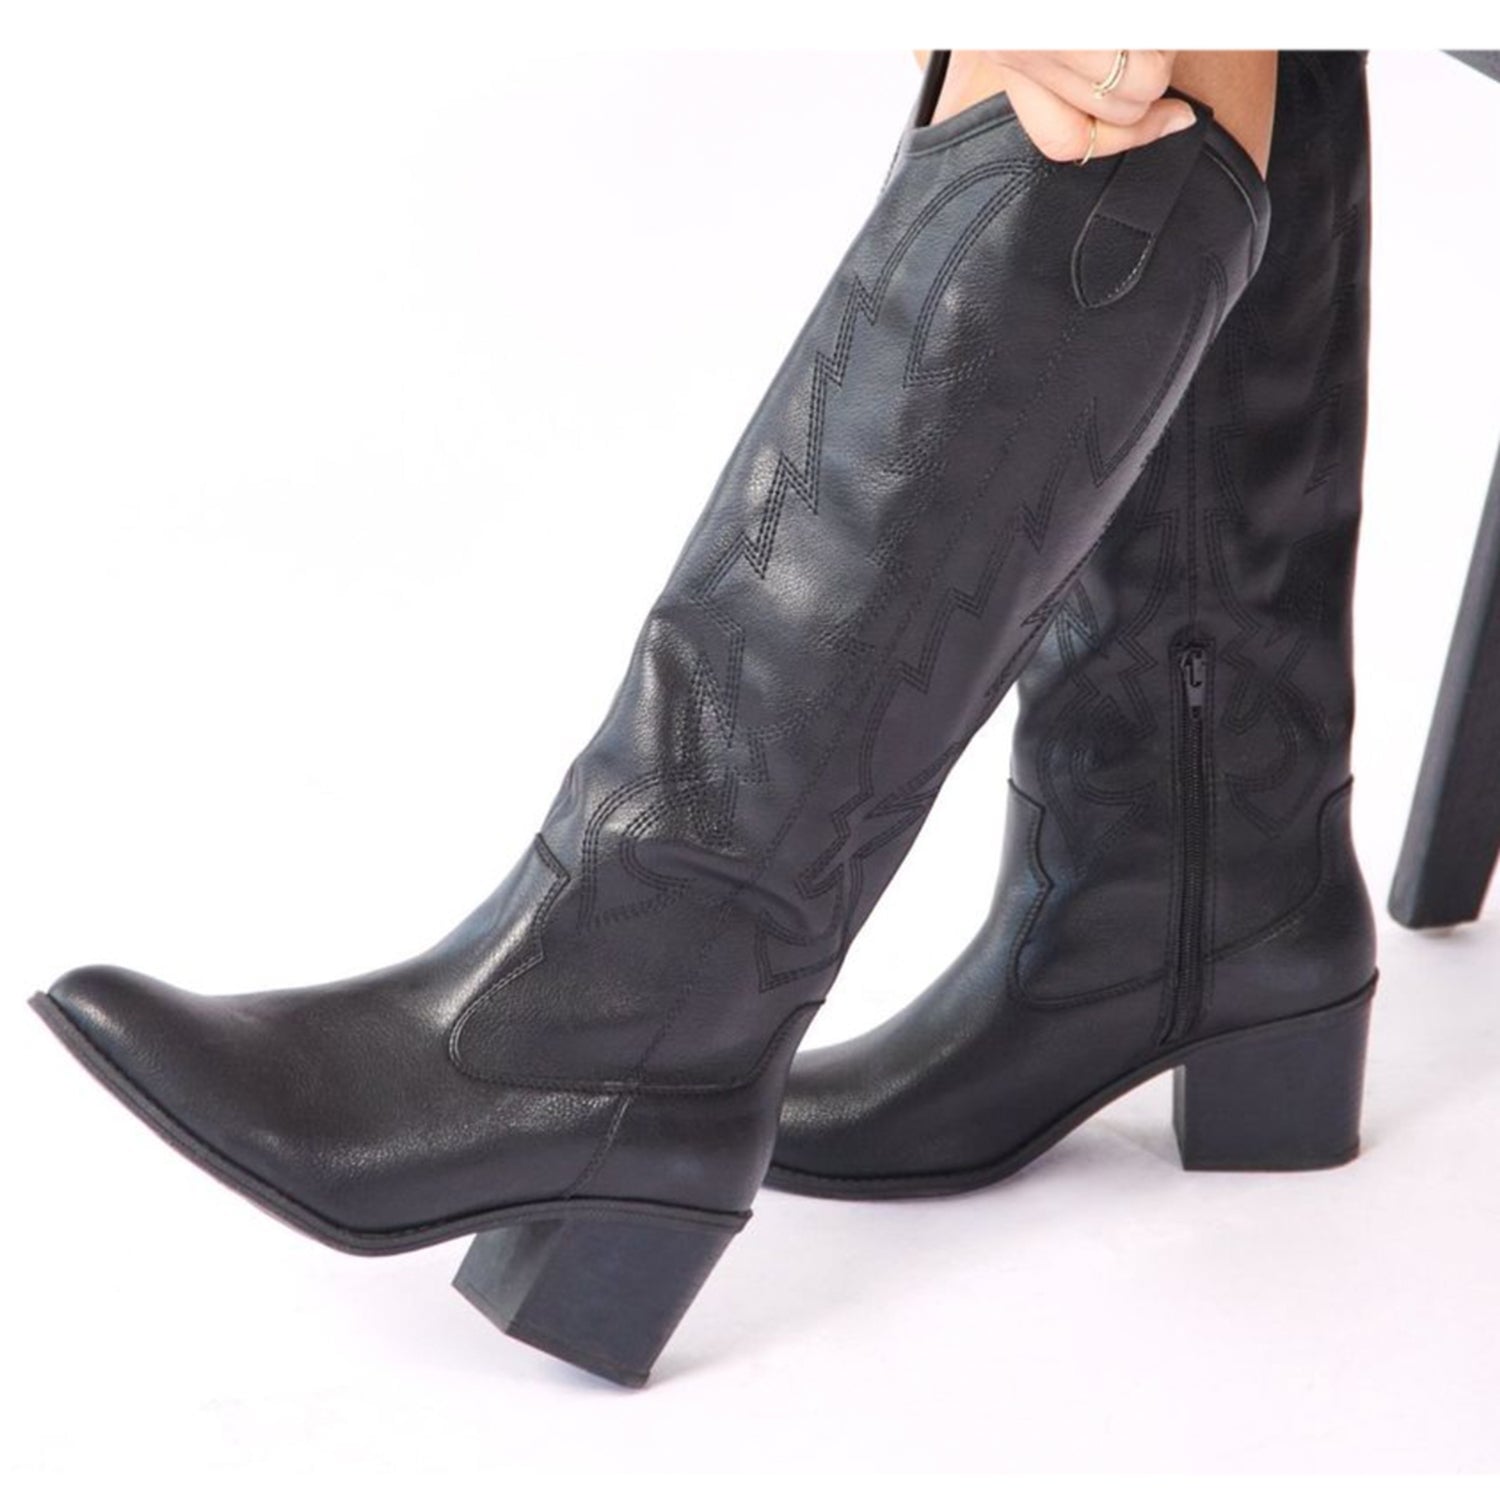 20 Must-Have Black Boots this Season